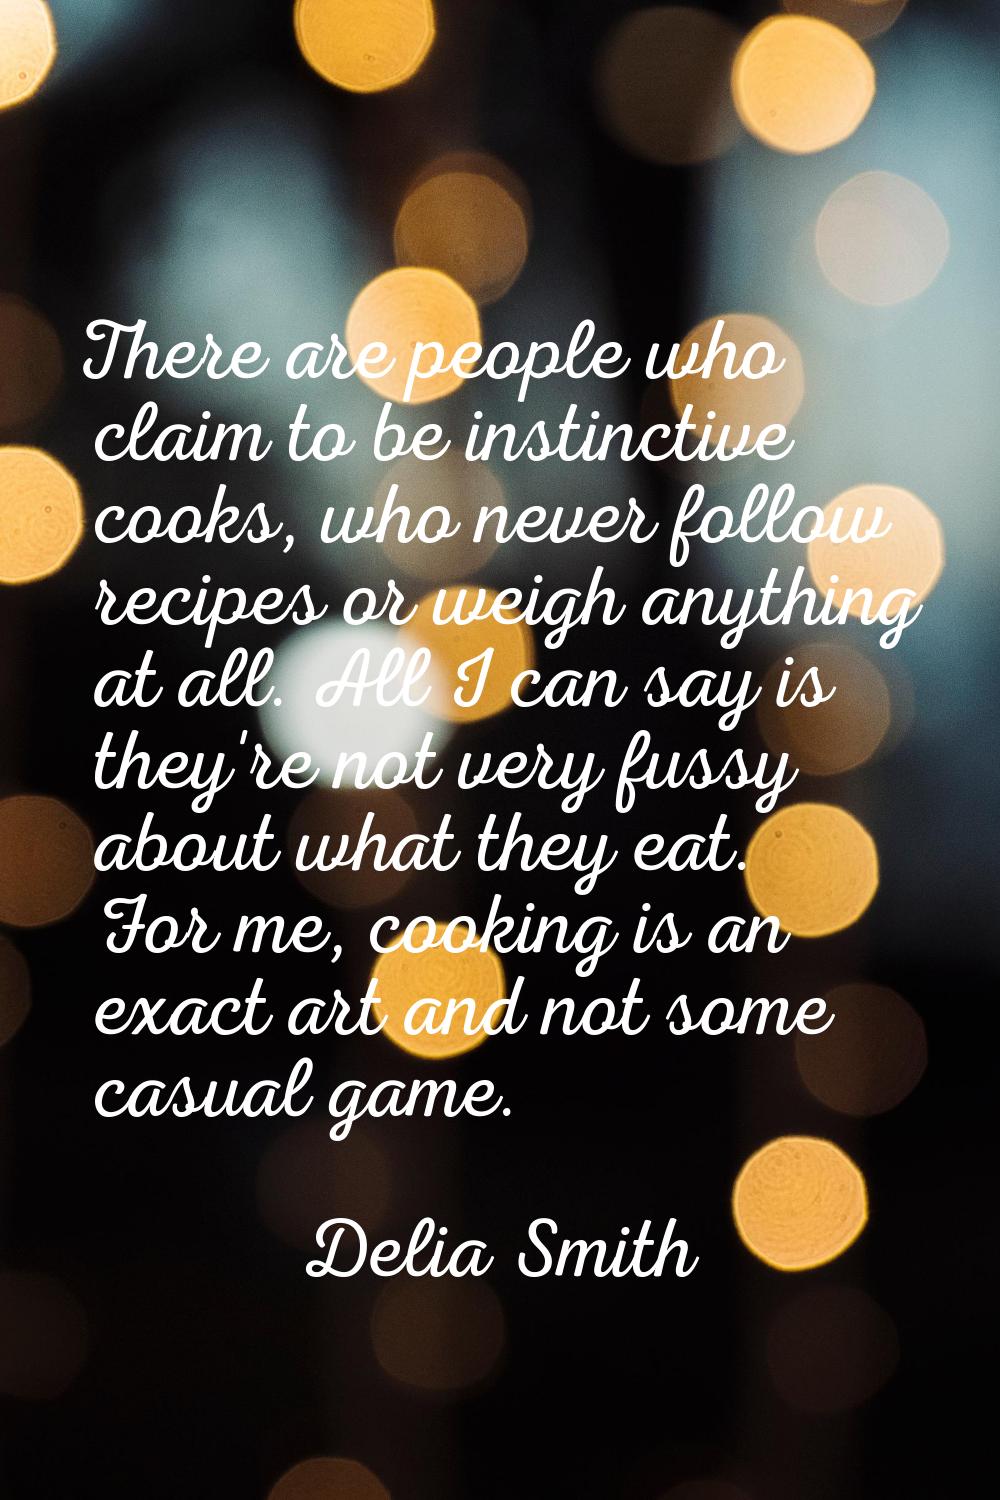 There are people who claim to be instinctive cooks, who never follow recipes or weigh anything at a